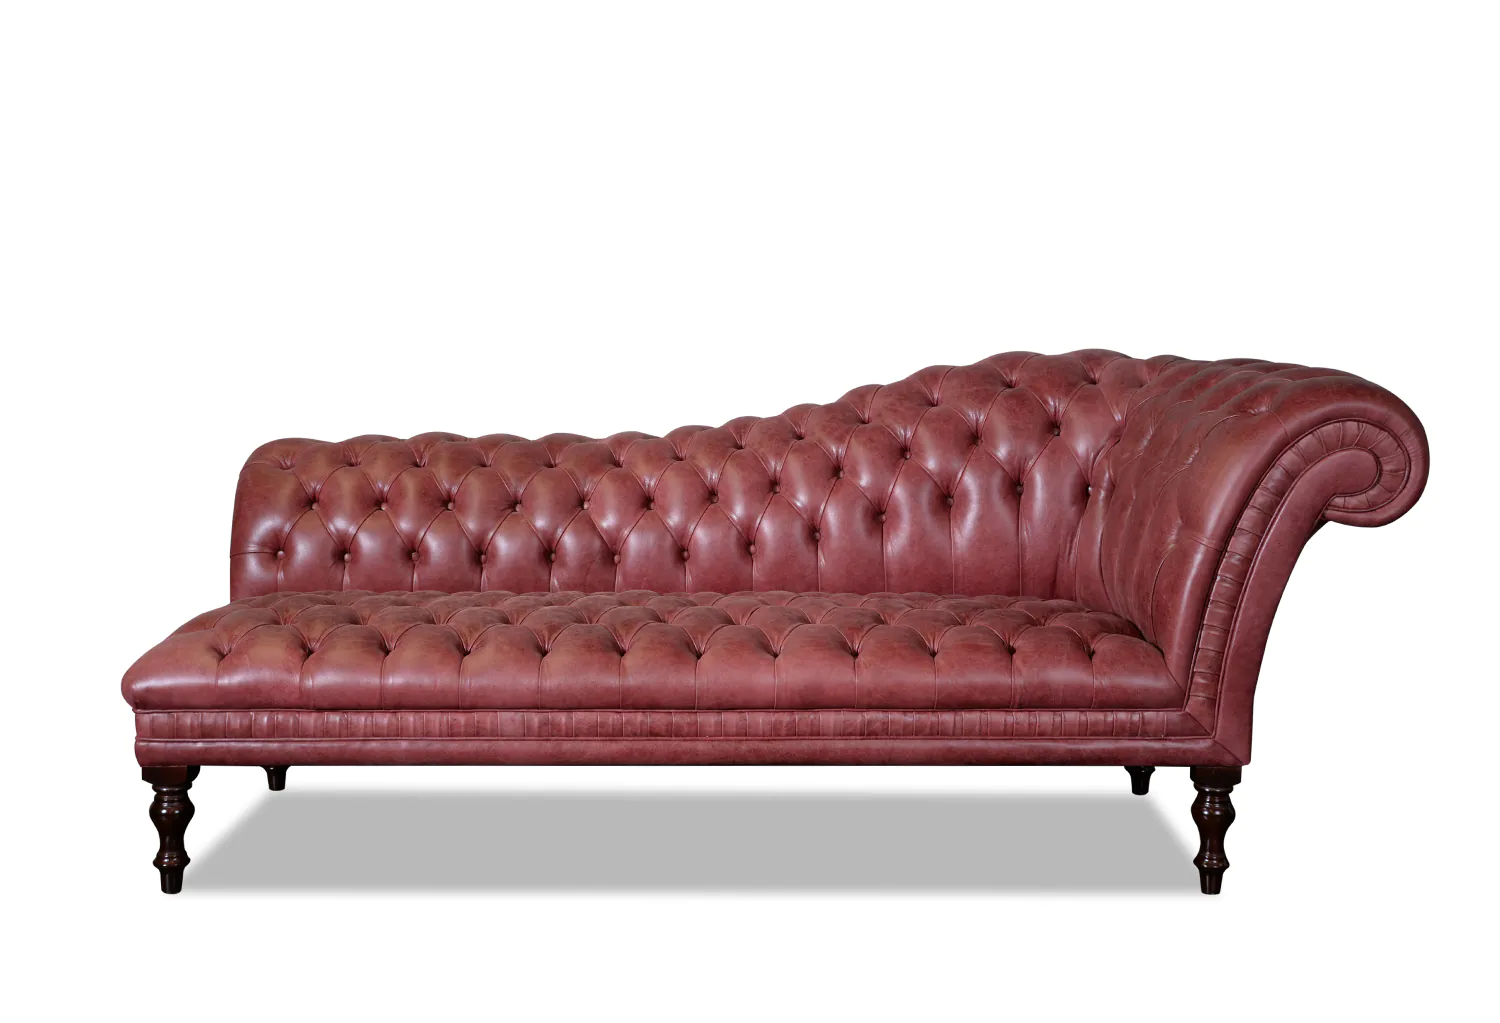 Chaise Longue Wessex